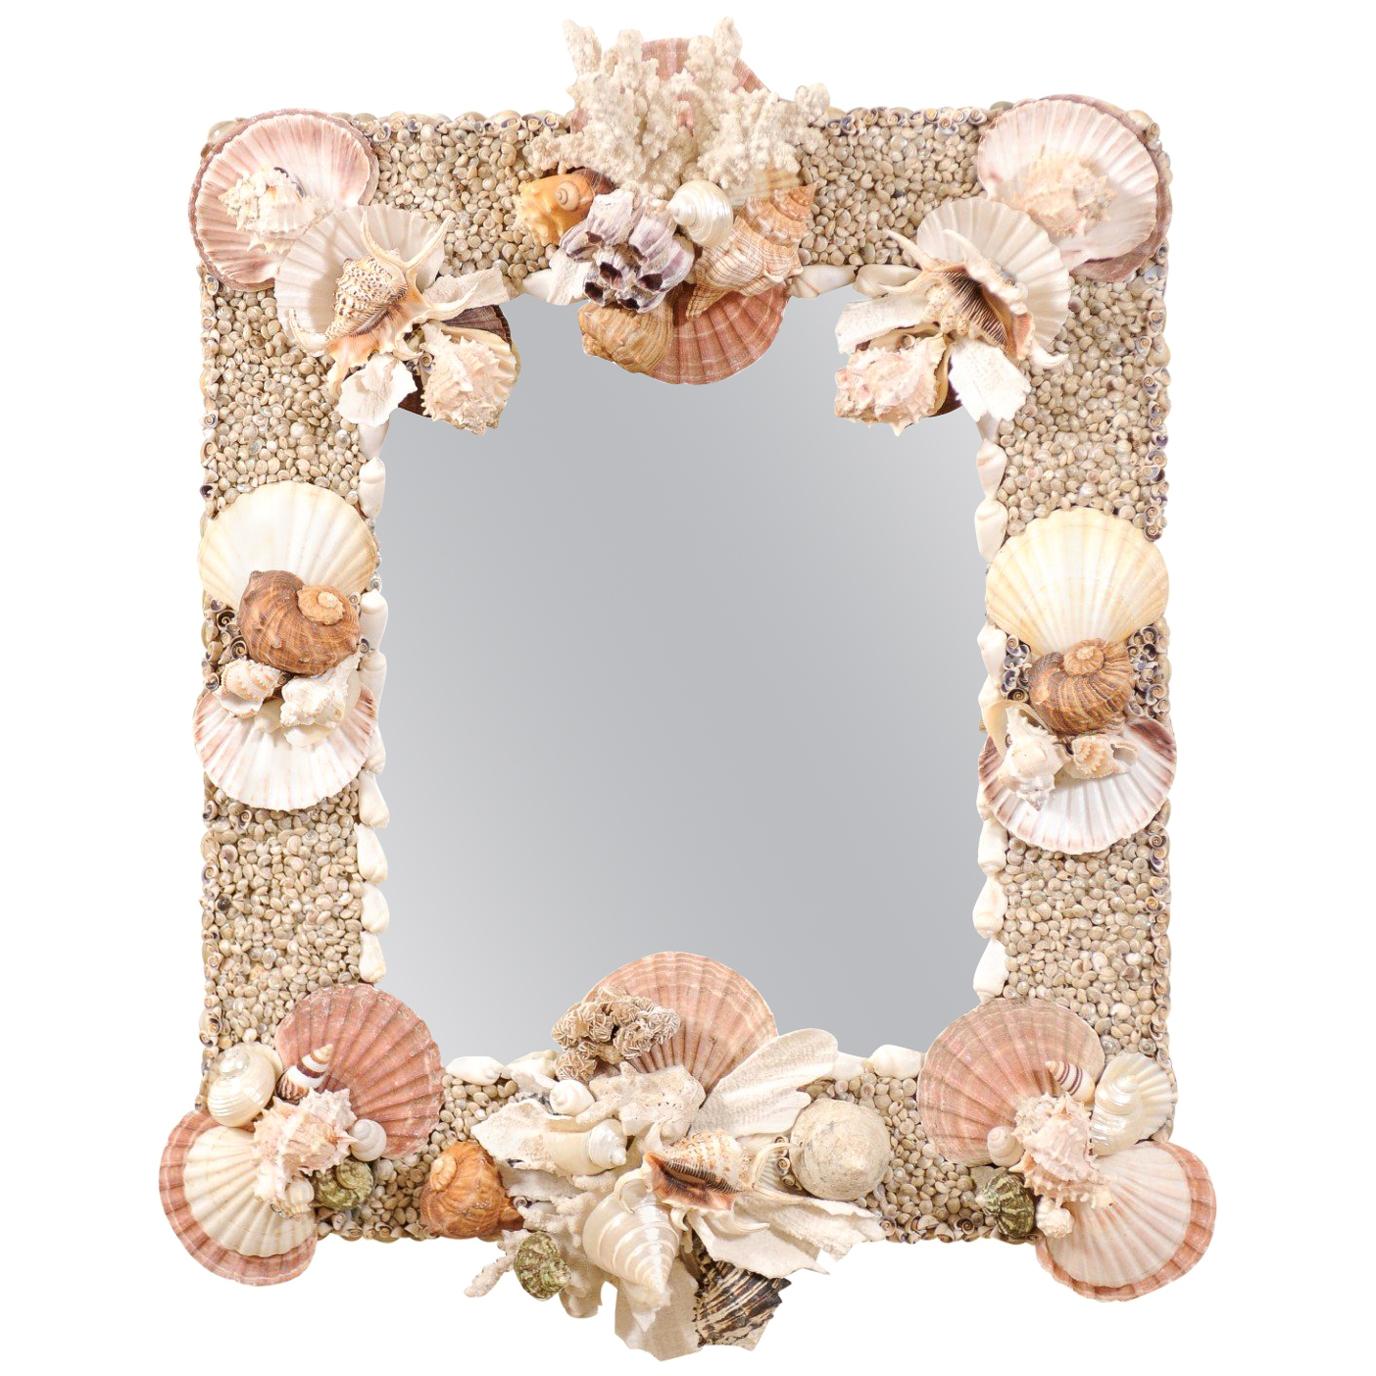 Elegant Beach-Themed Sea Shell and Coral Wall Mirror